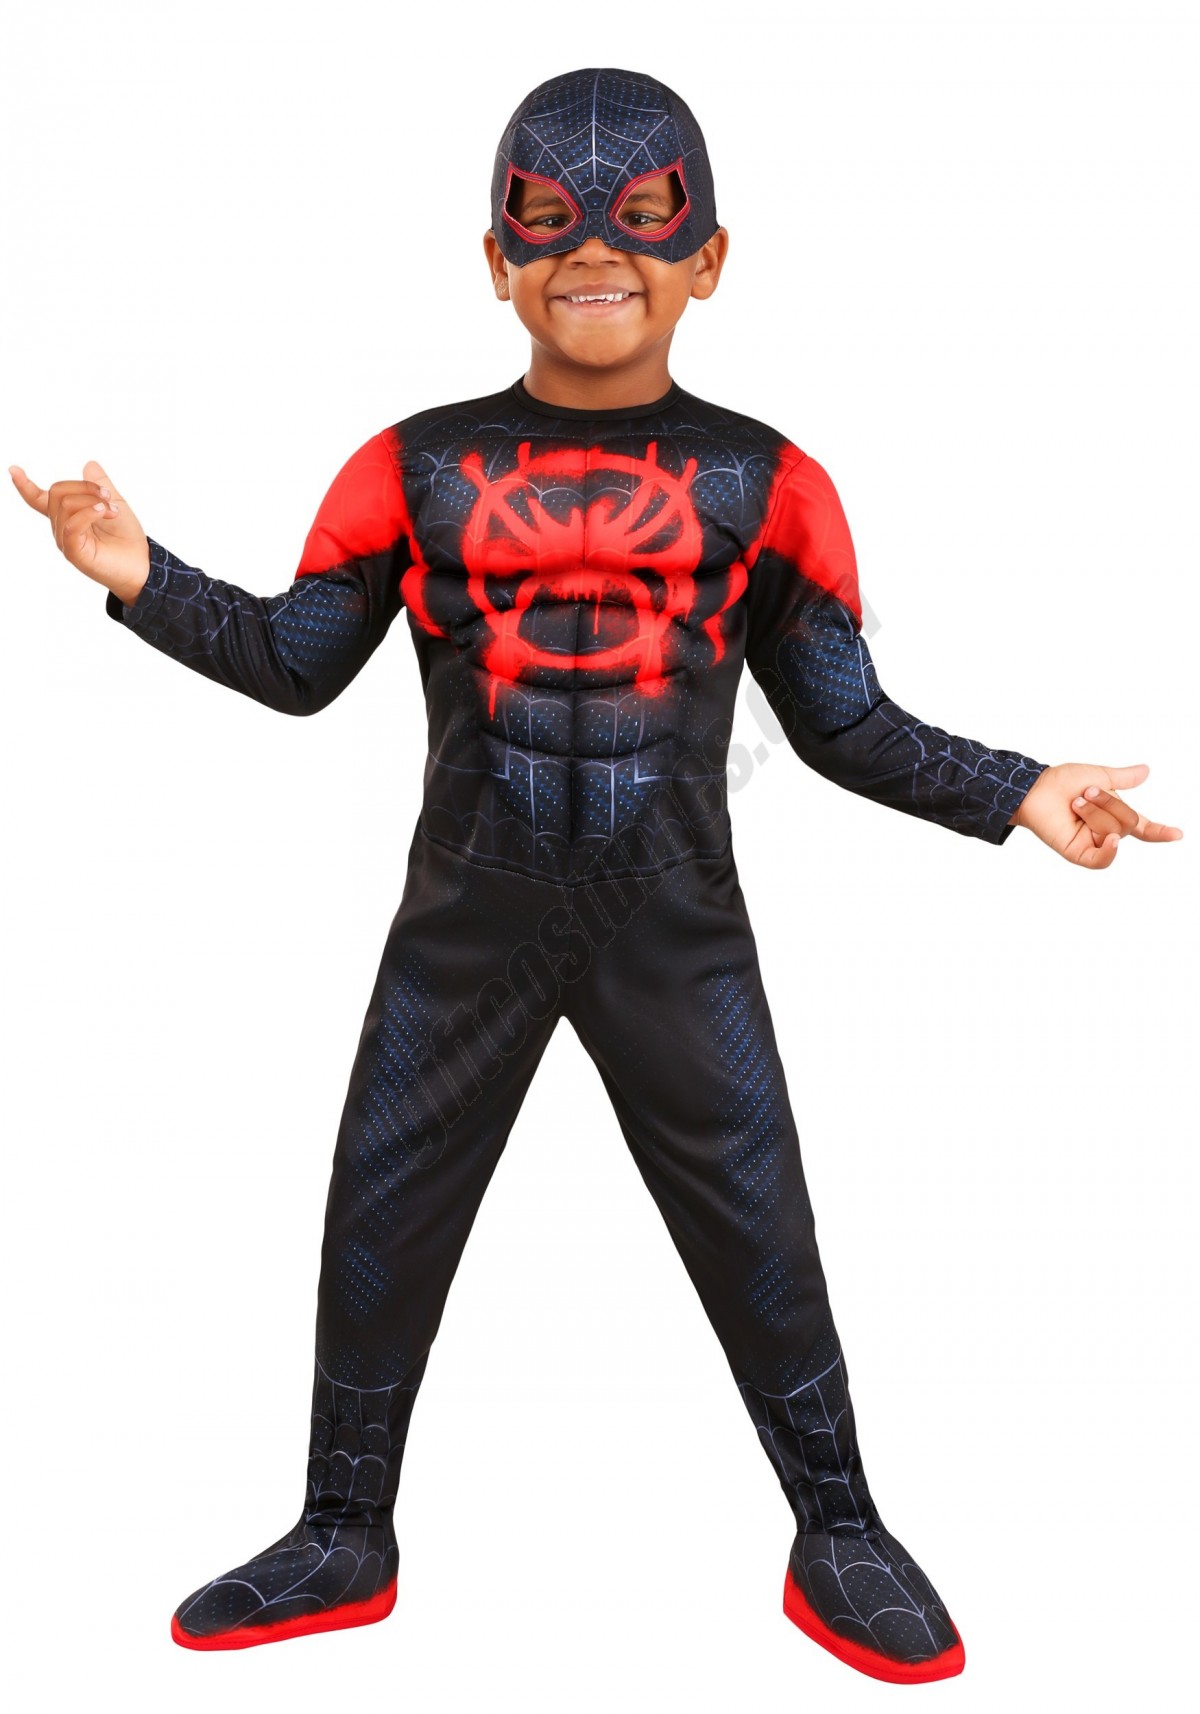 Toddler's Deluxe Spiderman Miles Morales Costume Promotions - -0